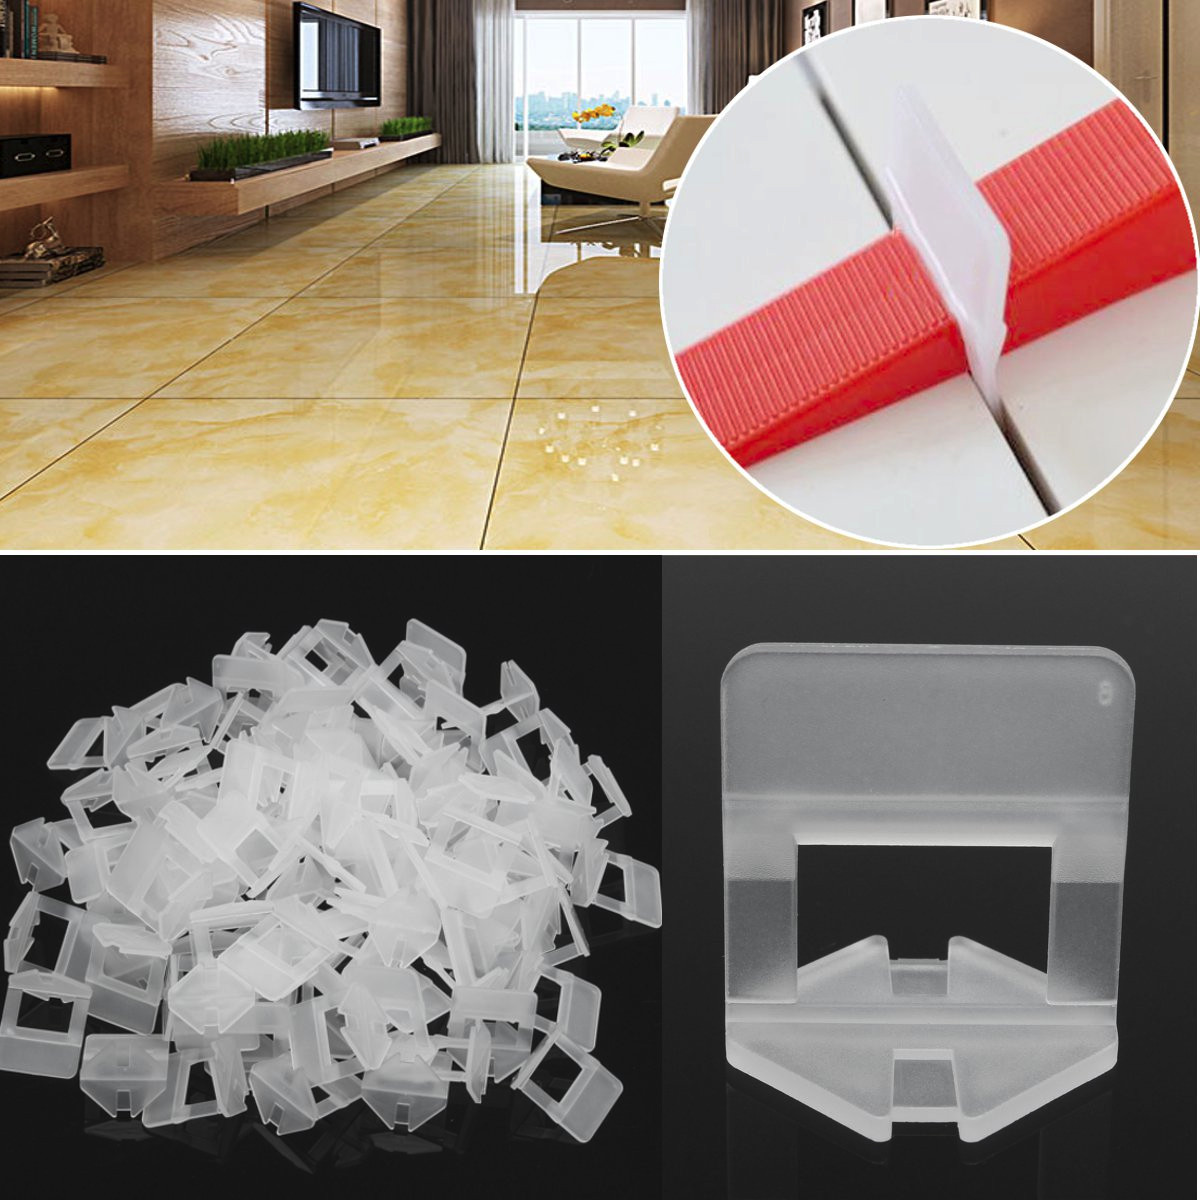 Find MACHIFIT 100/200Pcs 1 0mm 1 5mm White Ceramic Tile Leveling System Clip Tiling Accessibility Spacer Plastic Clip for Sale on Gipsybee.com with cryptocurrencies